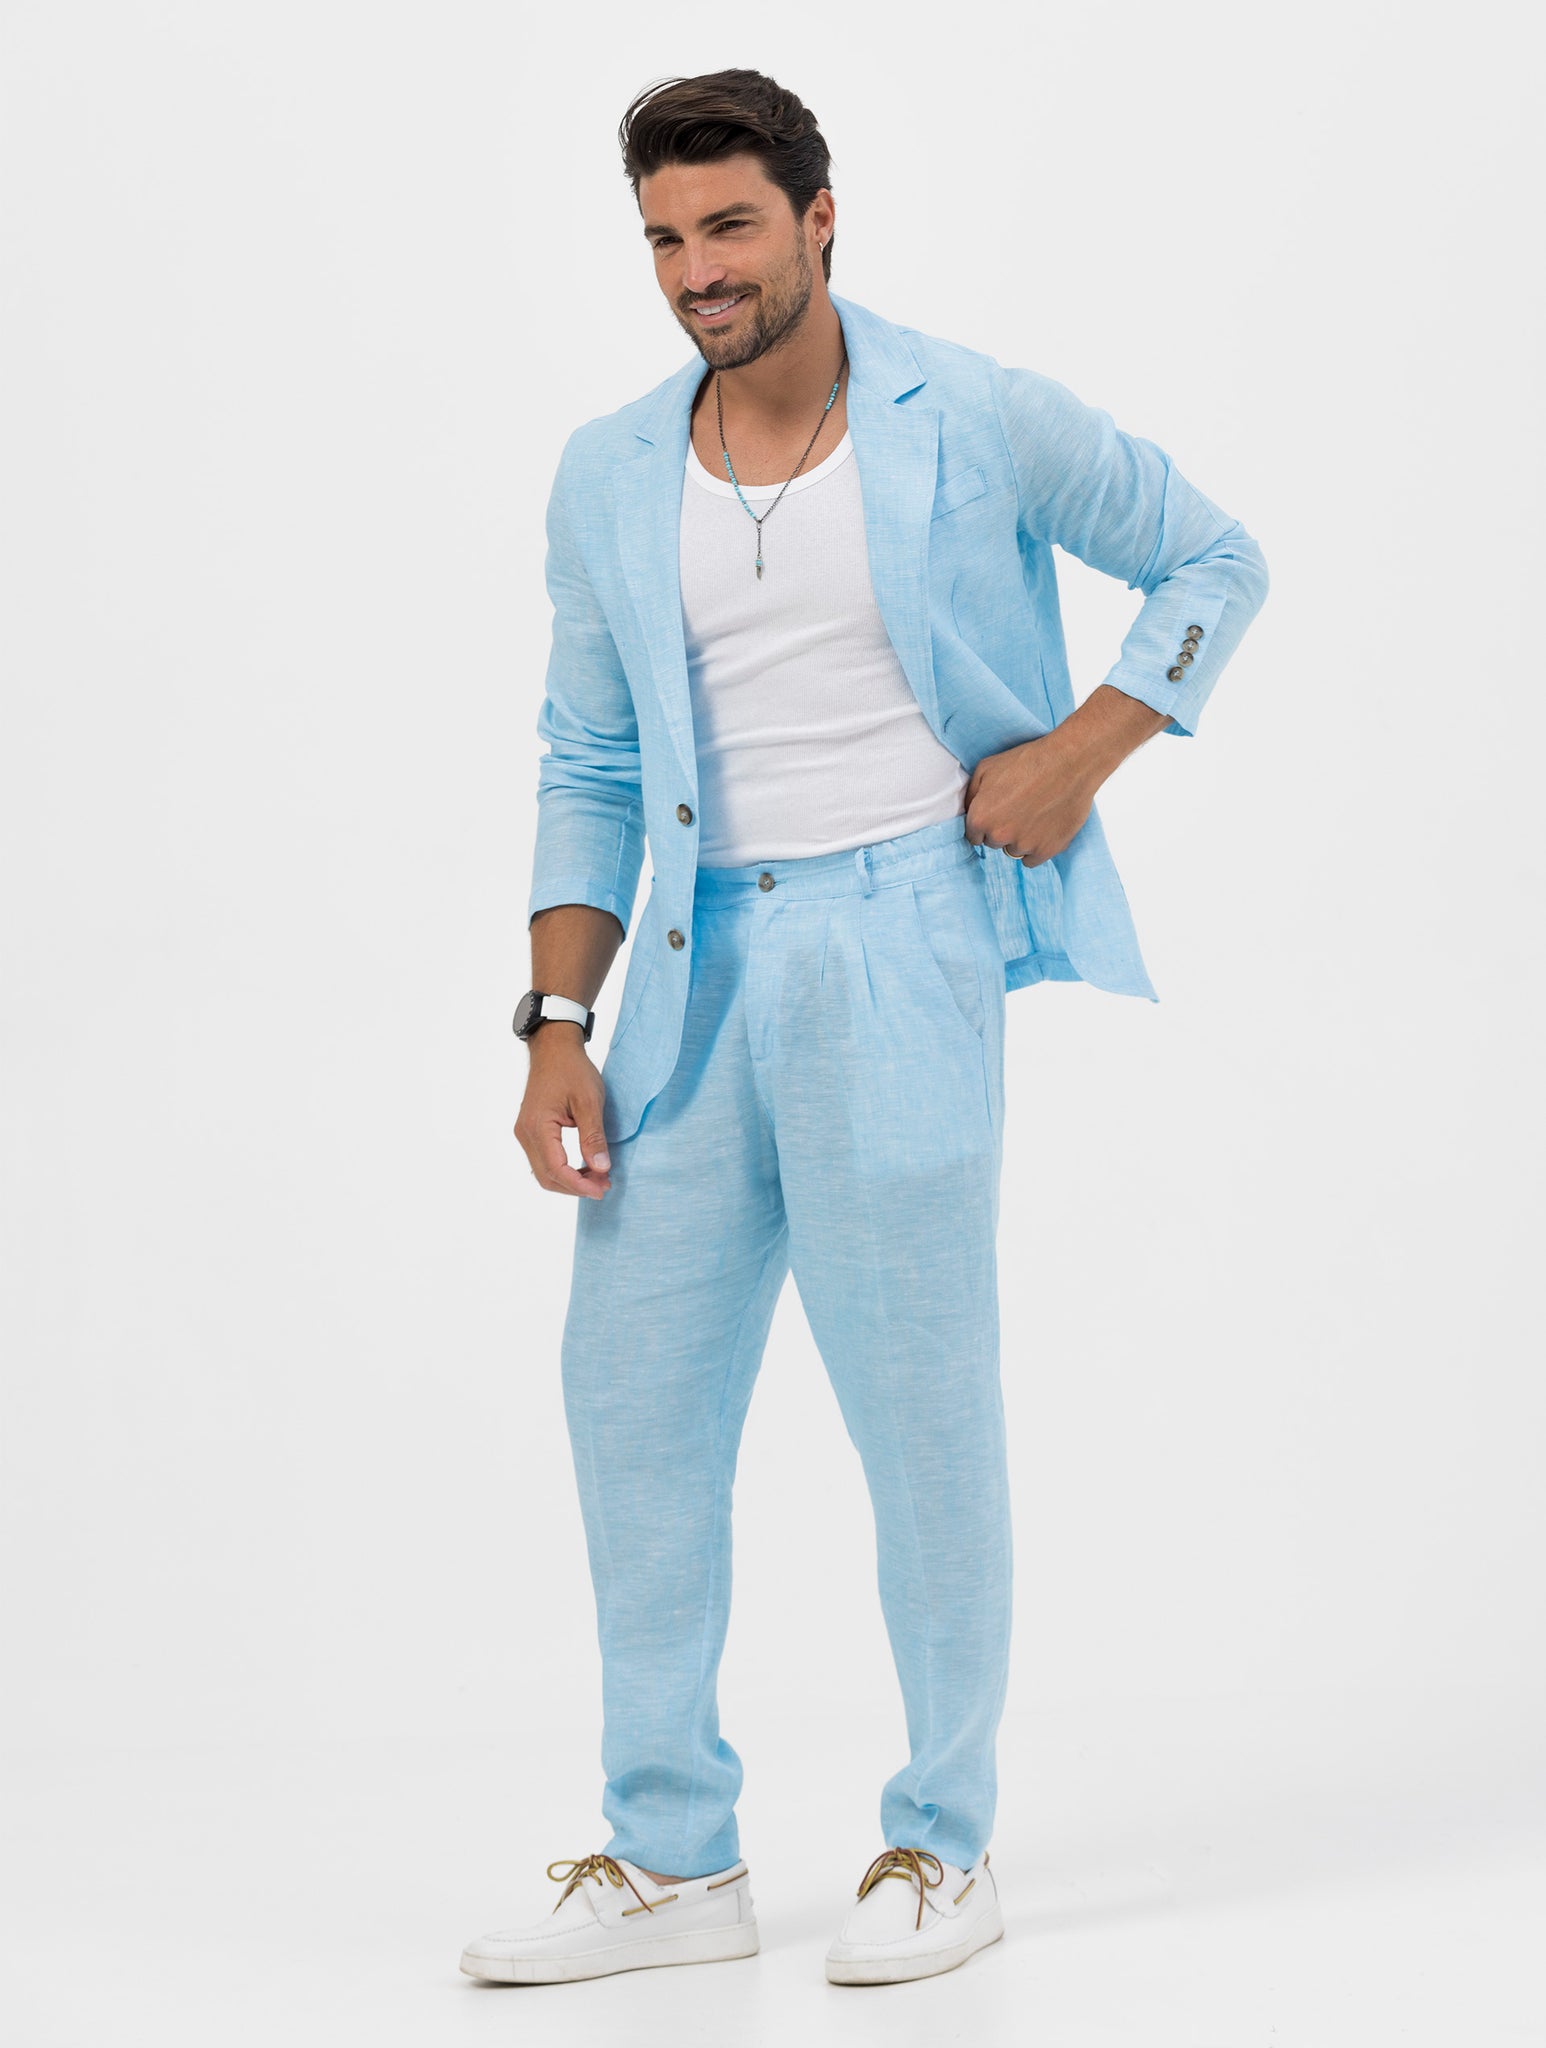 FEDRO SINGLE BREASTED SUIT IN TURQUOISE